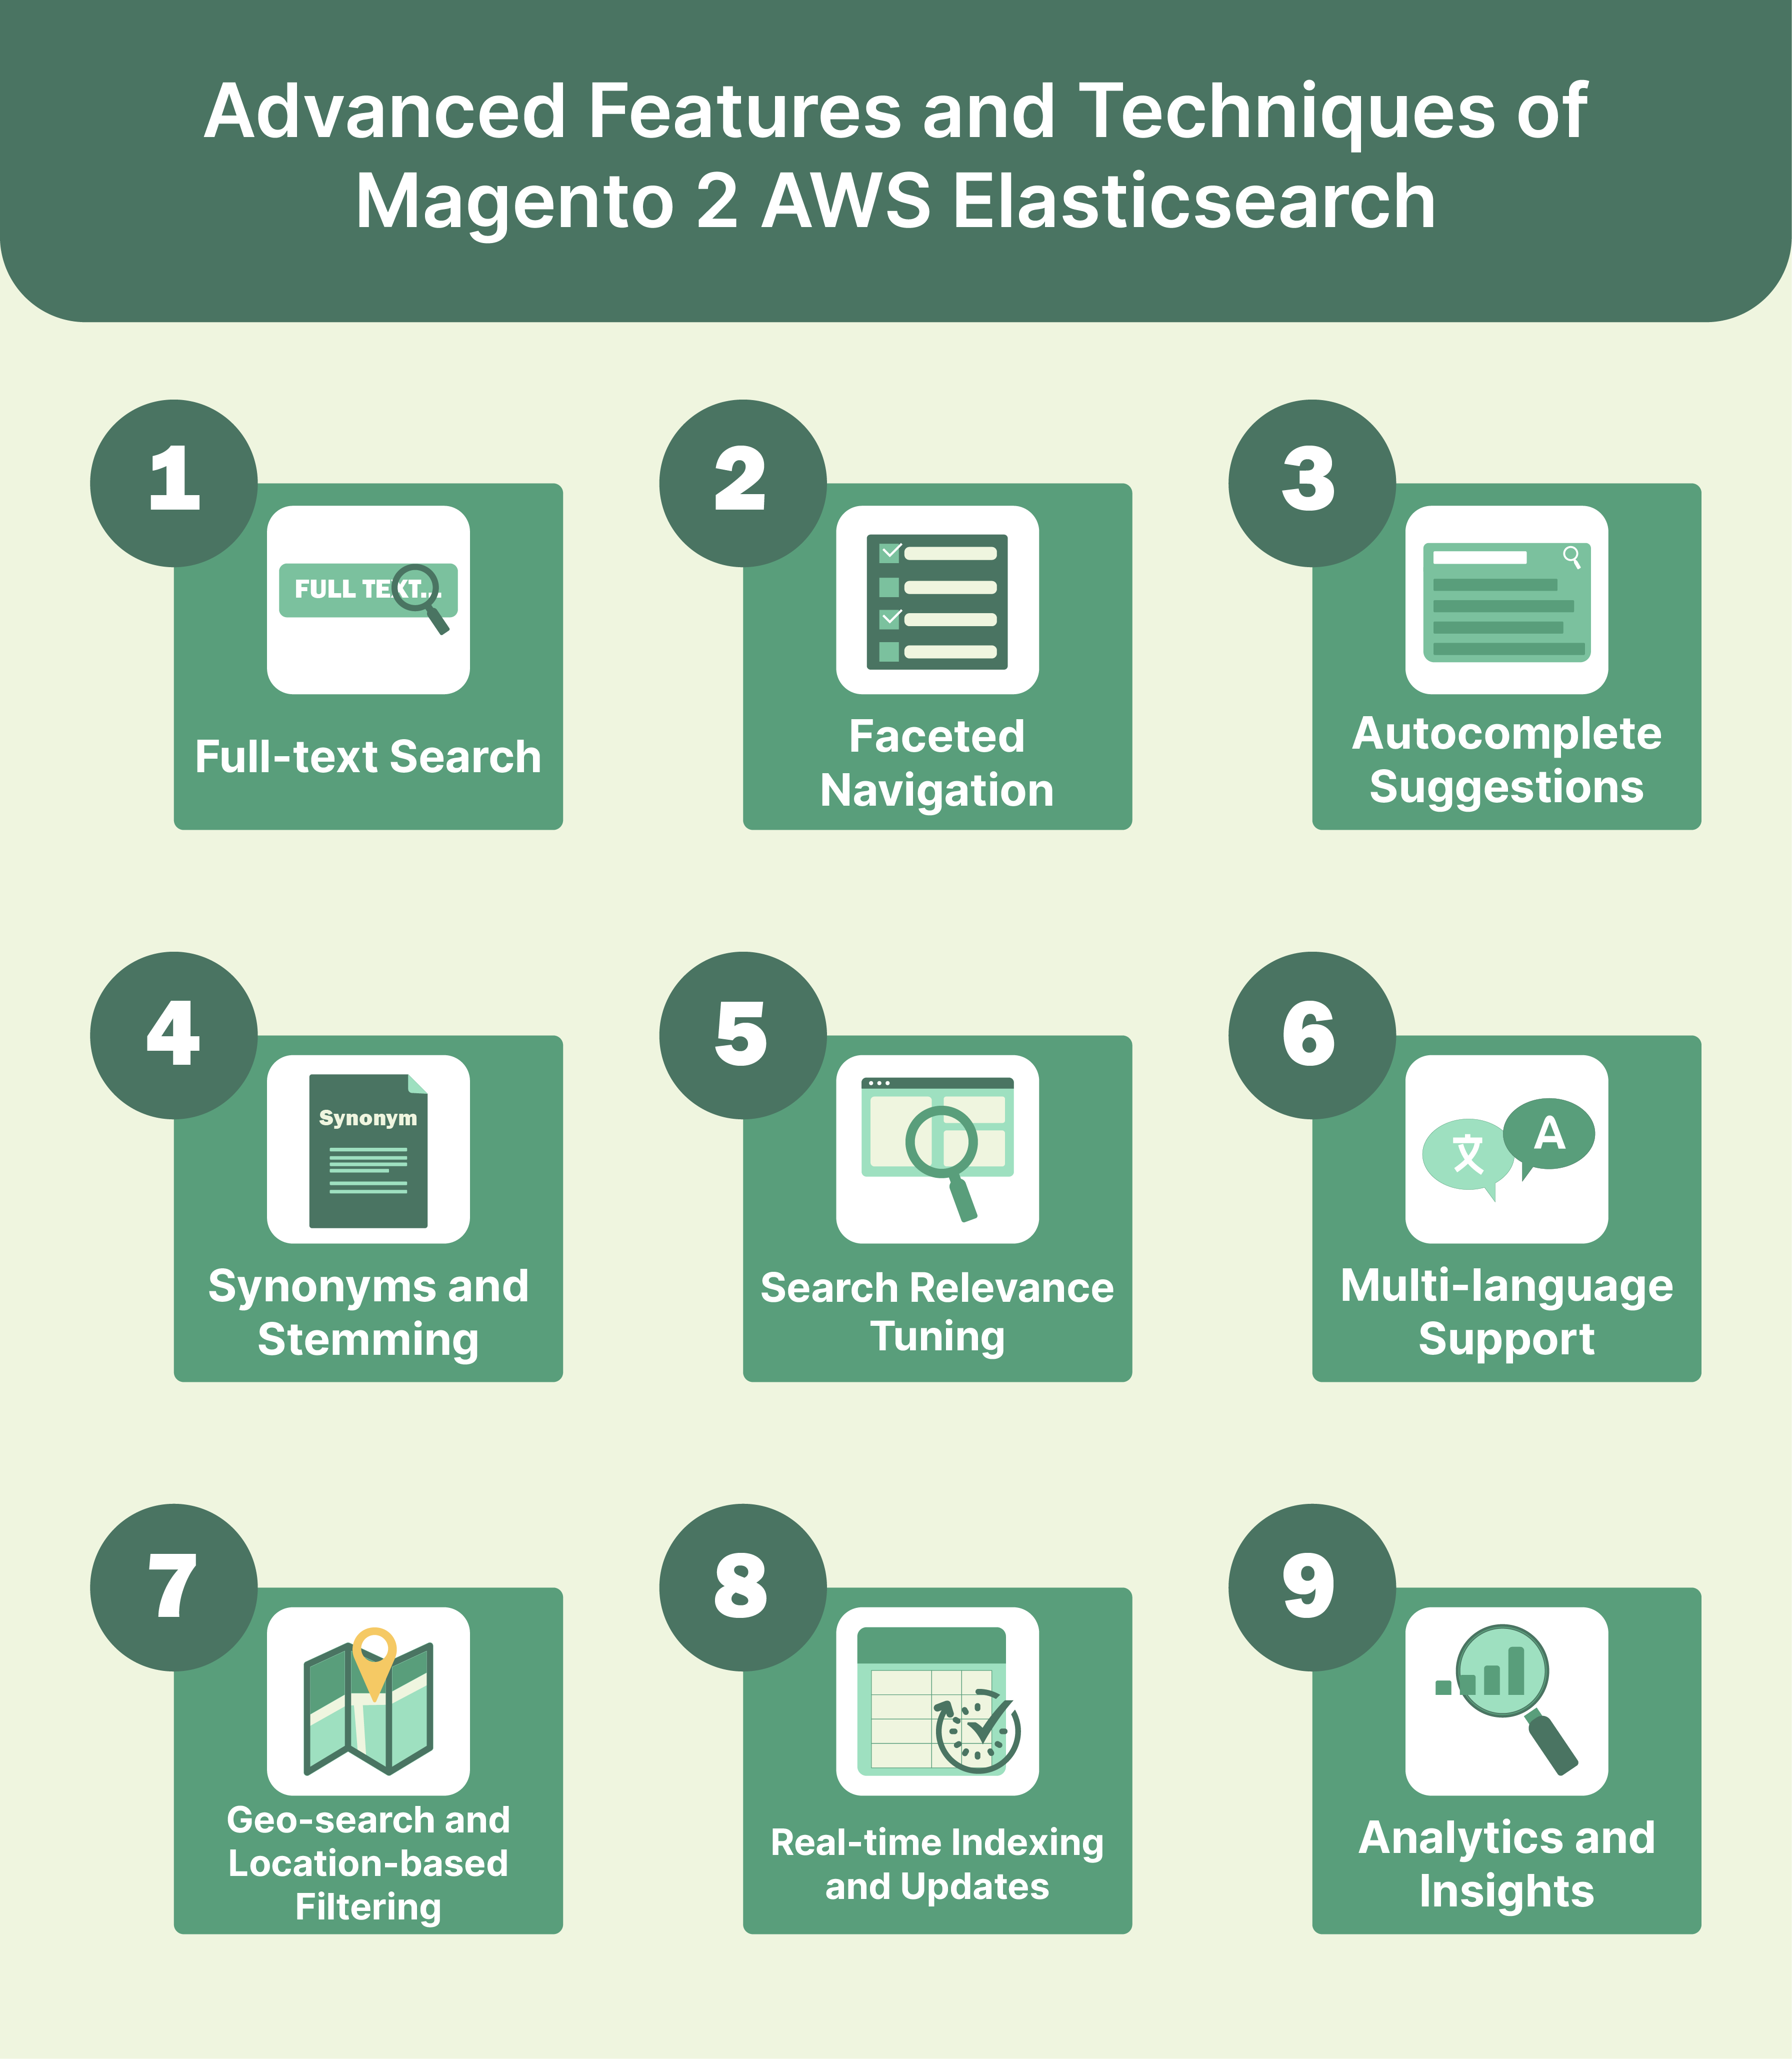 Advanced Features and Techniques of Magento 2 AWS Elasticsearch